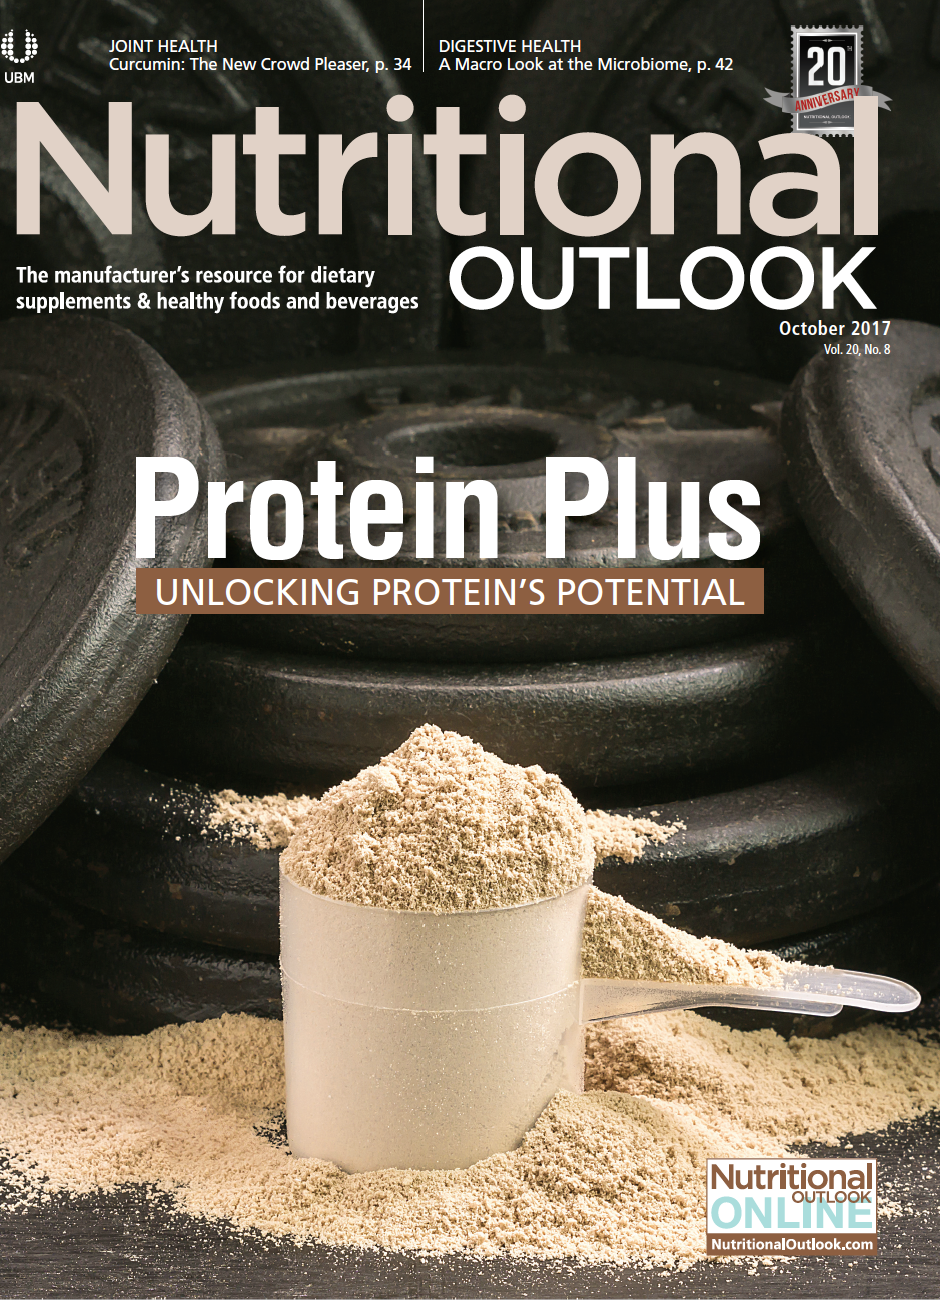 Nutritional Outlook Vol. 20 No. 8